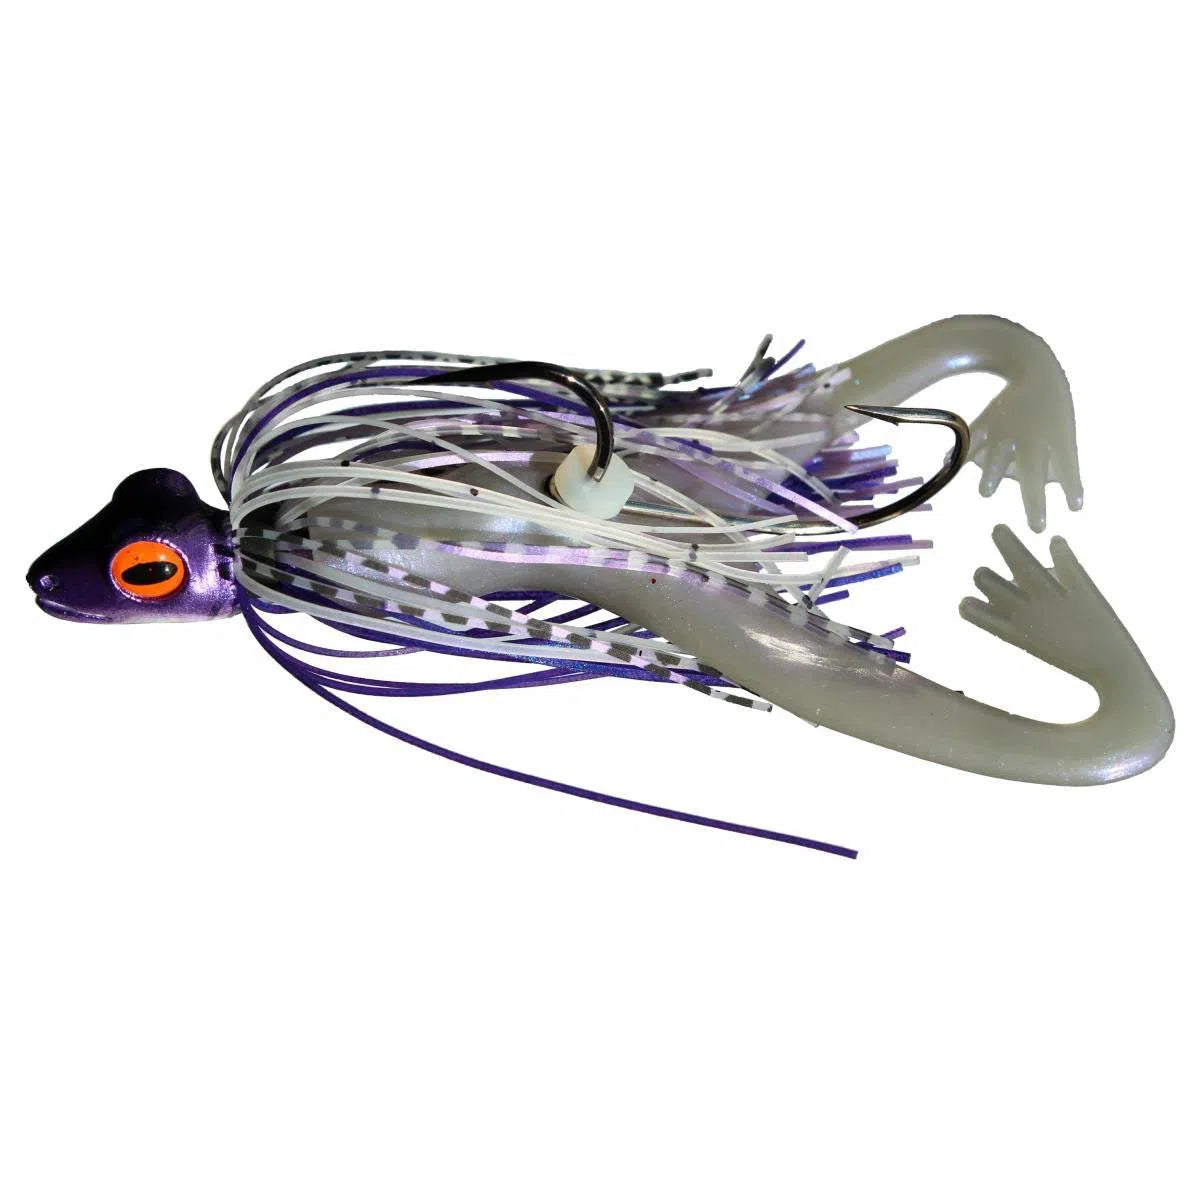 Baby Squid Bait finesse tube spinner - WELCOME TO JAMES GANG